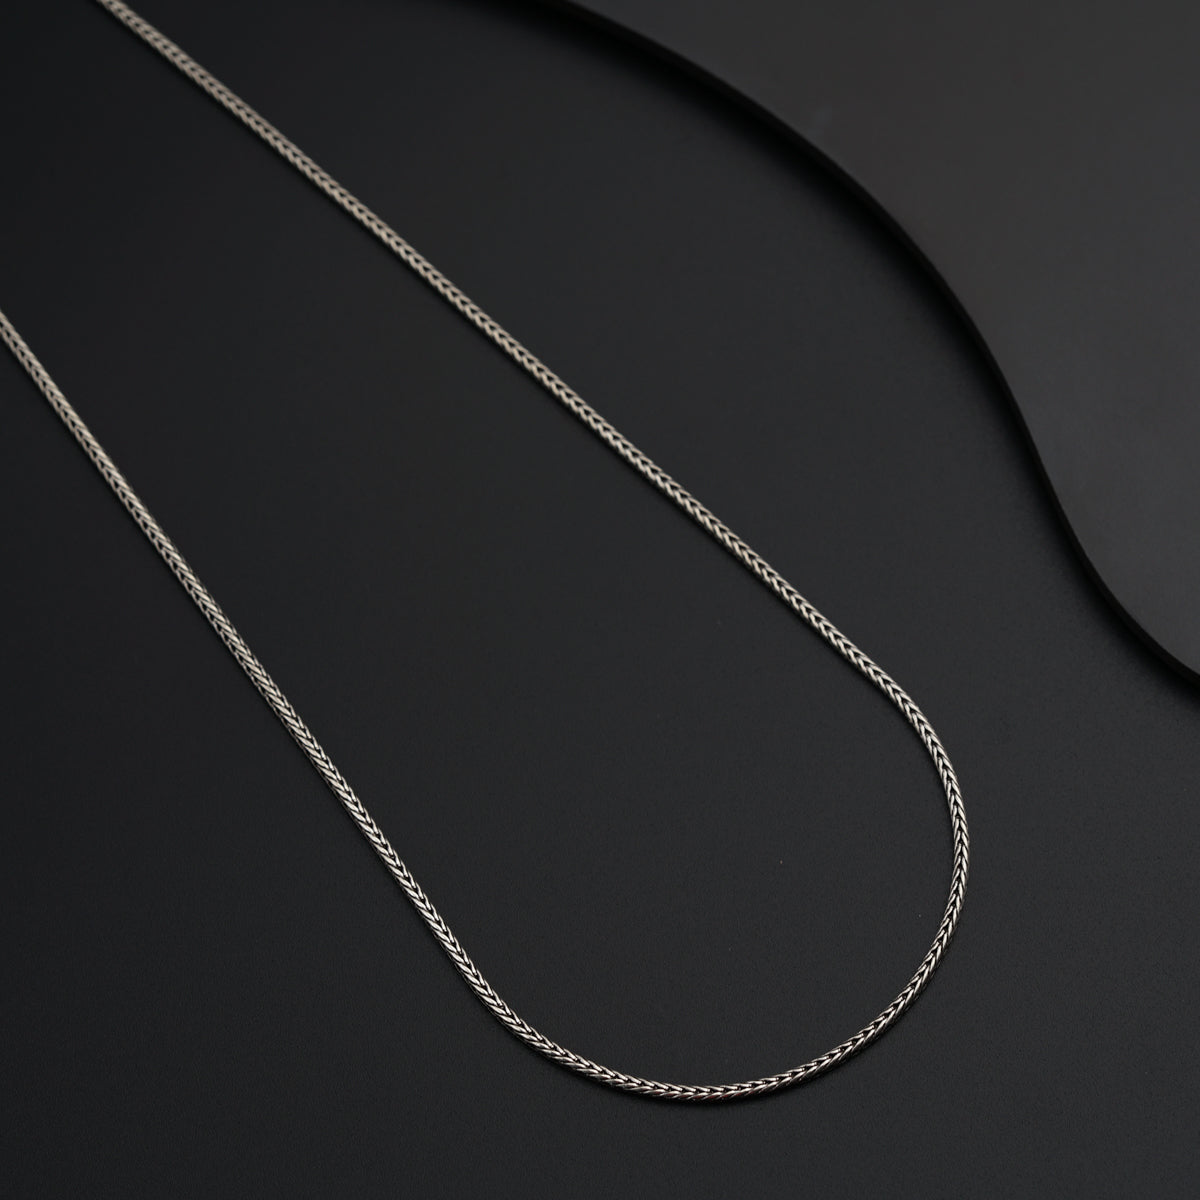 a silver chain is laying on a black surface